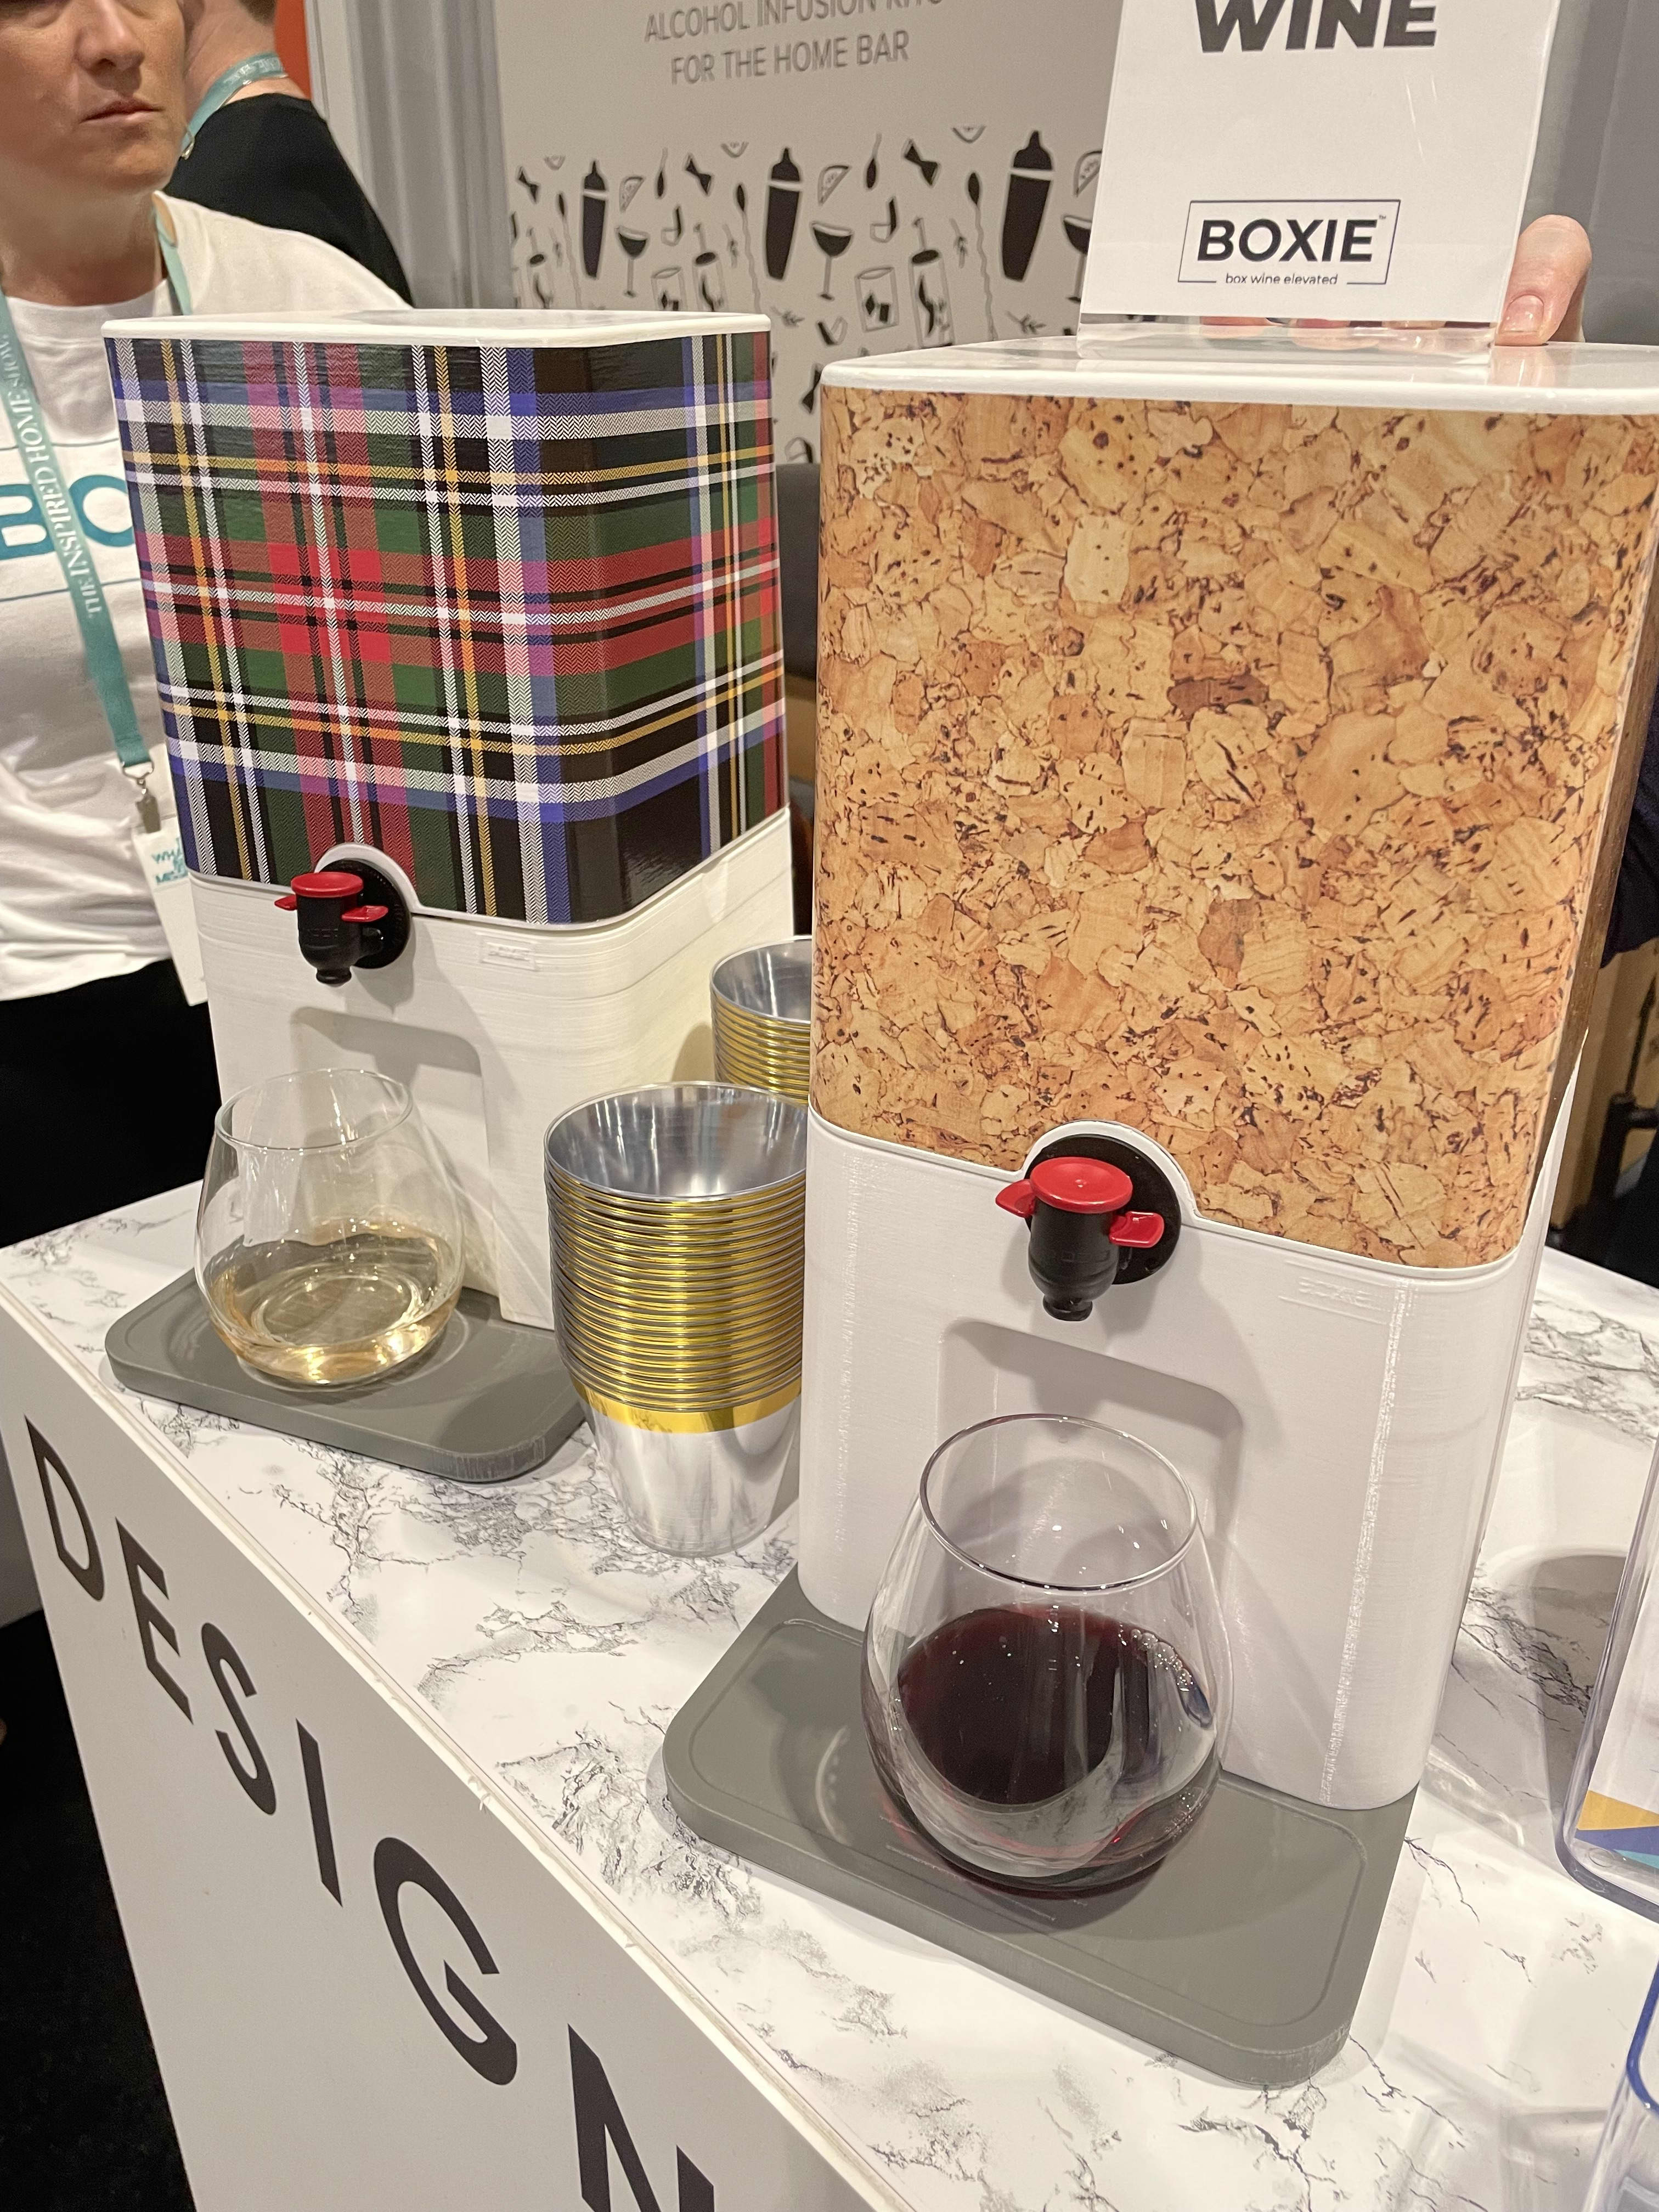 New Kitchen Gadgets Shown at the Inspired Home Housewares Show